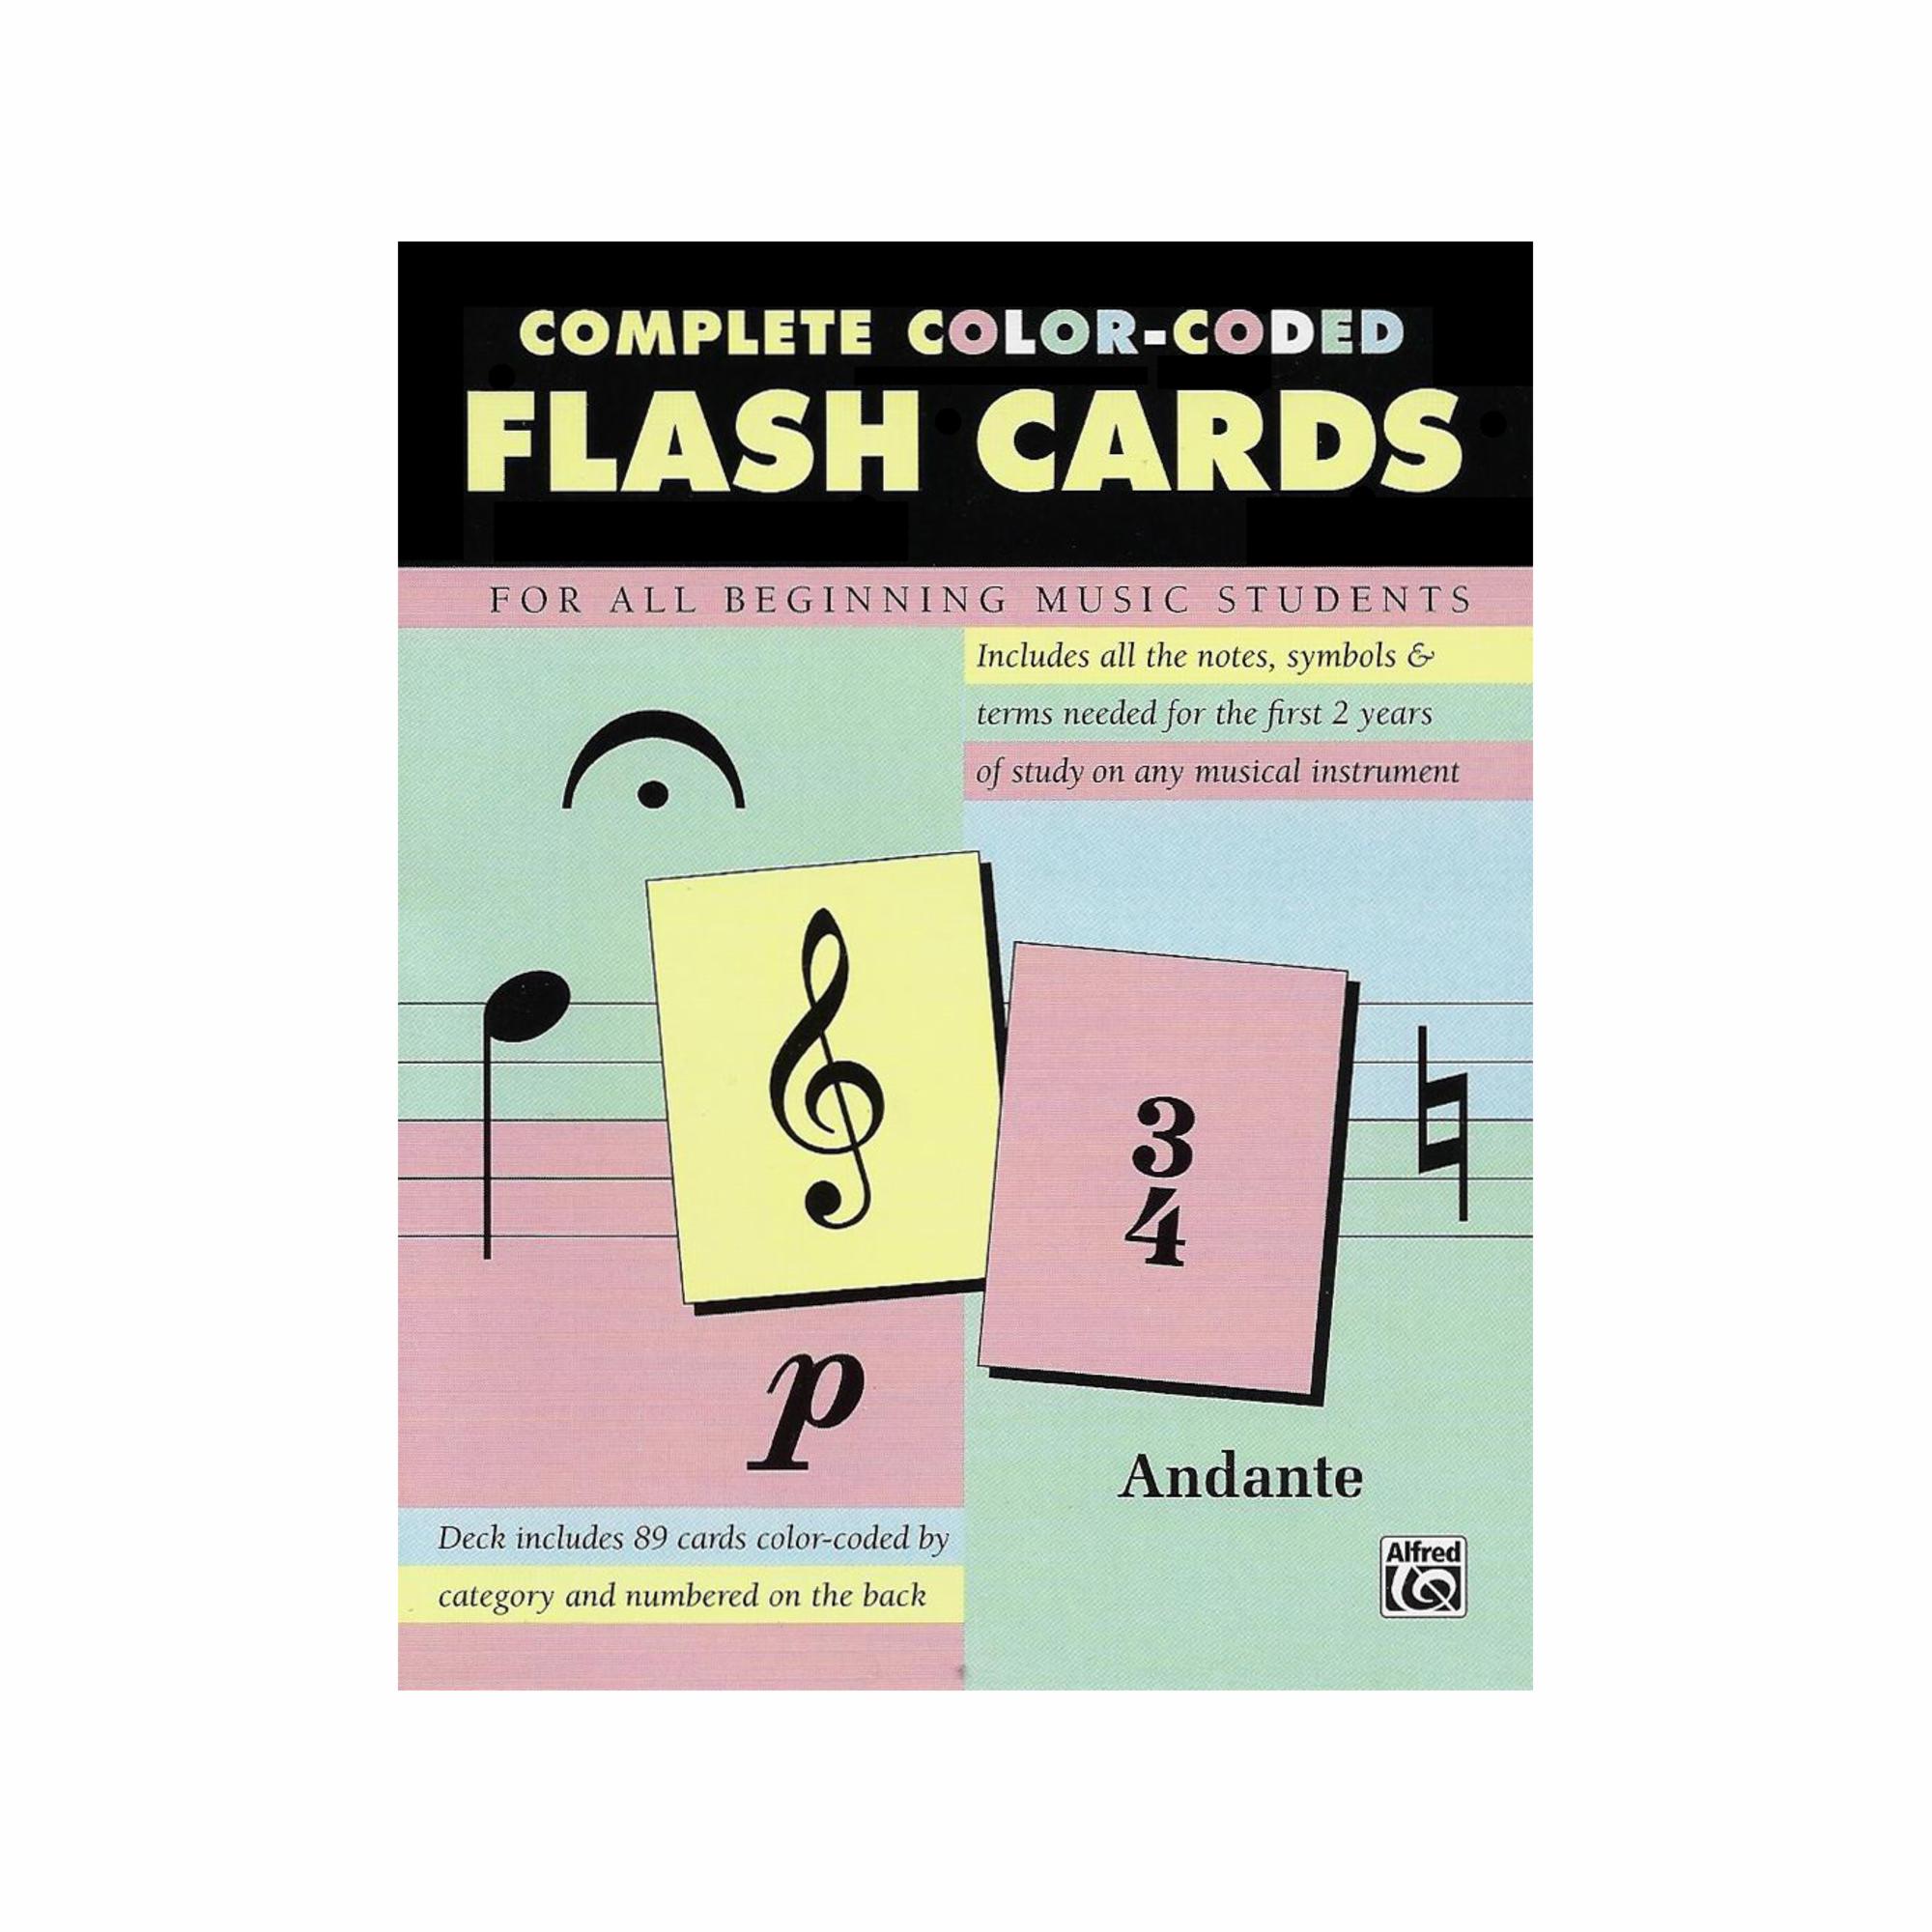 Flash Cards for All Beginning Music Students